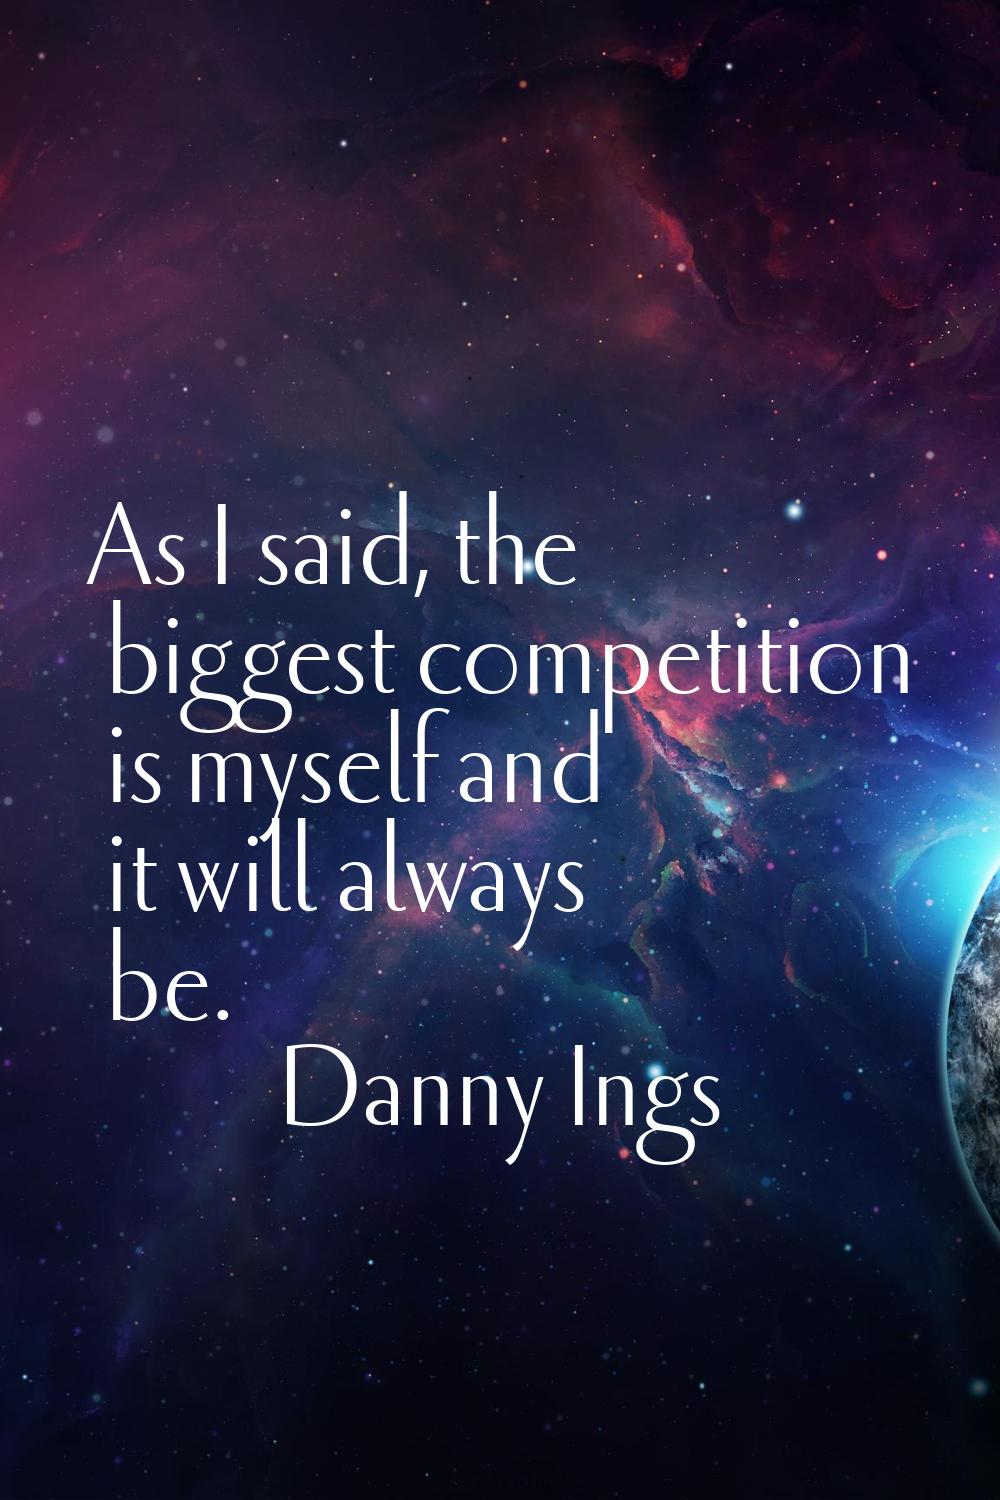 As I said, the biggest competition is myself and it will always be.